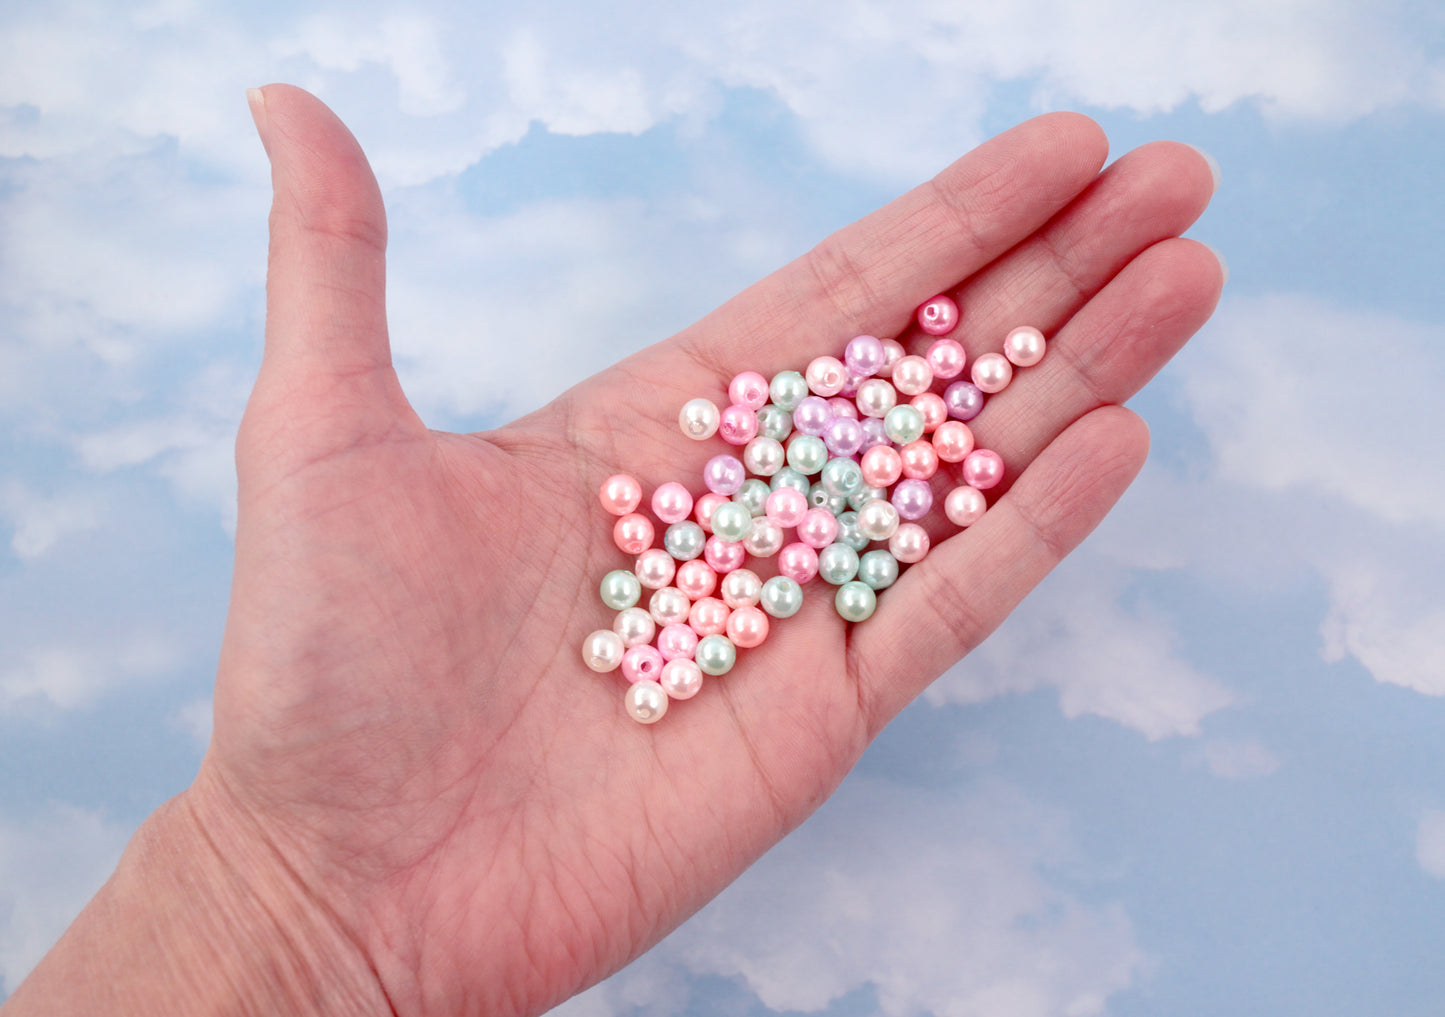 6mm Small Round Pastel Acrylic Pearl Plastic Beads - 500 pc set